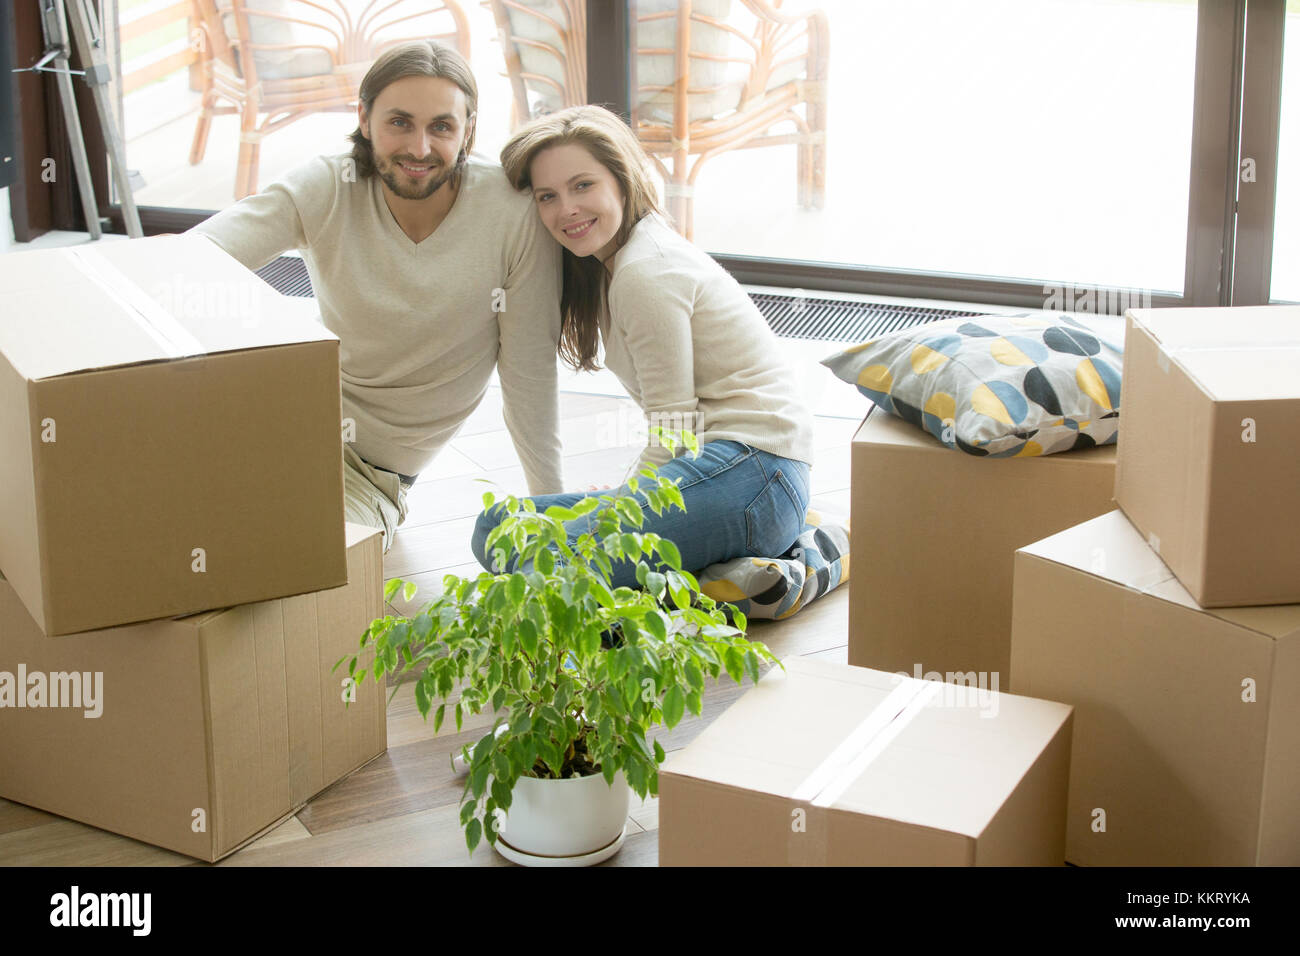 Happy couple looking at camera sitting with boxes, moving day Stock Photo